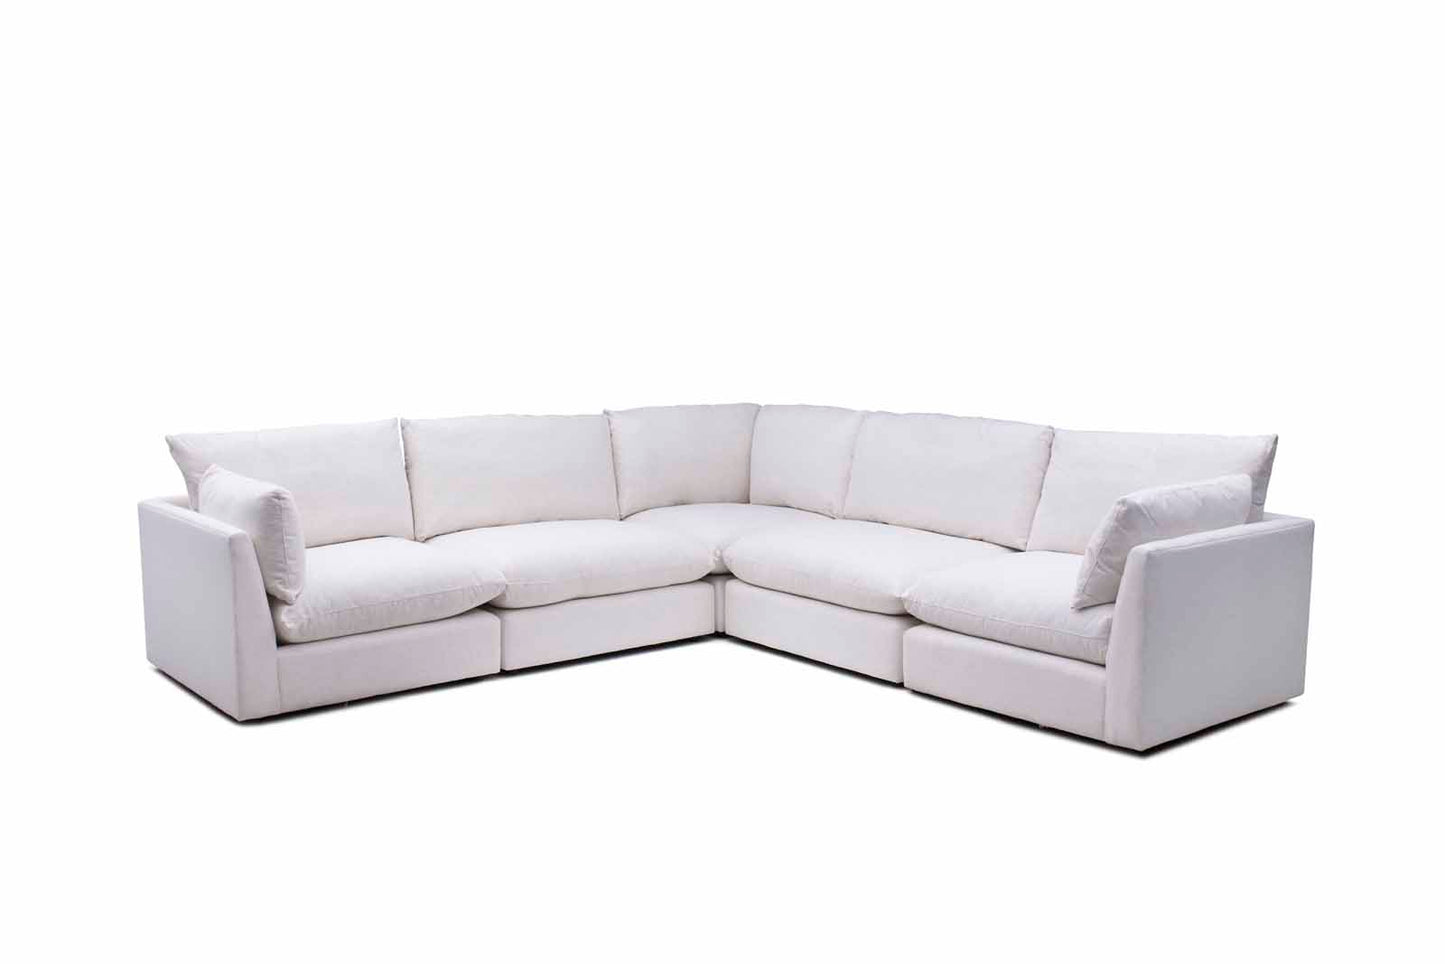 Coquina Modular Sectional in Nomad Snow 4 Piece